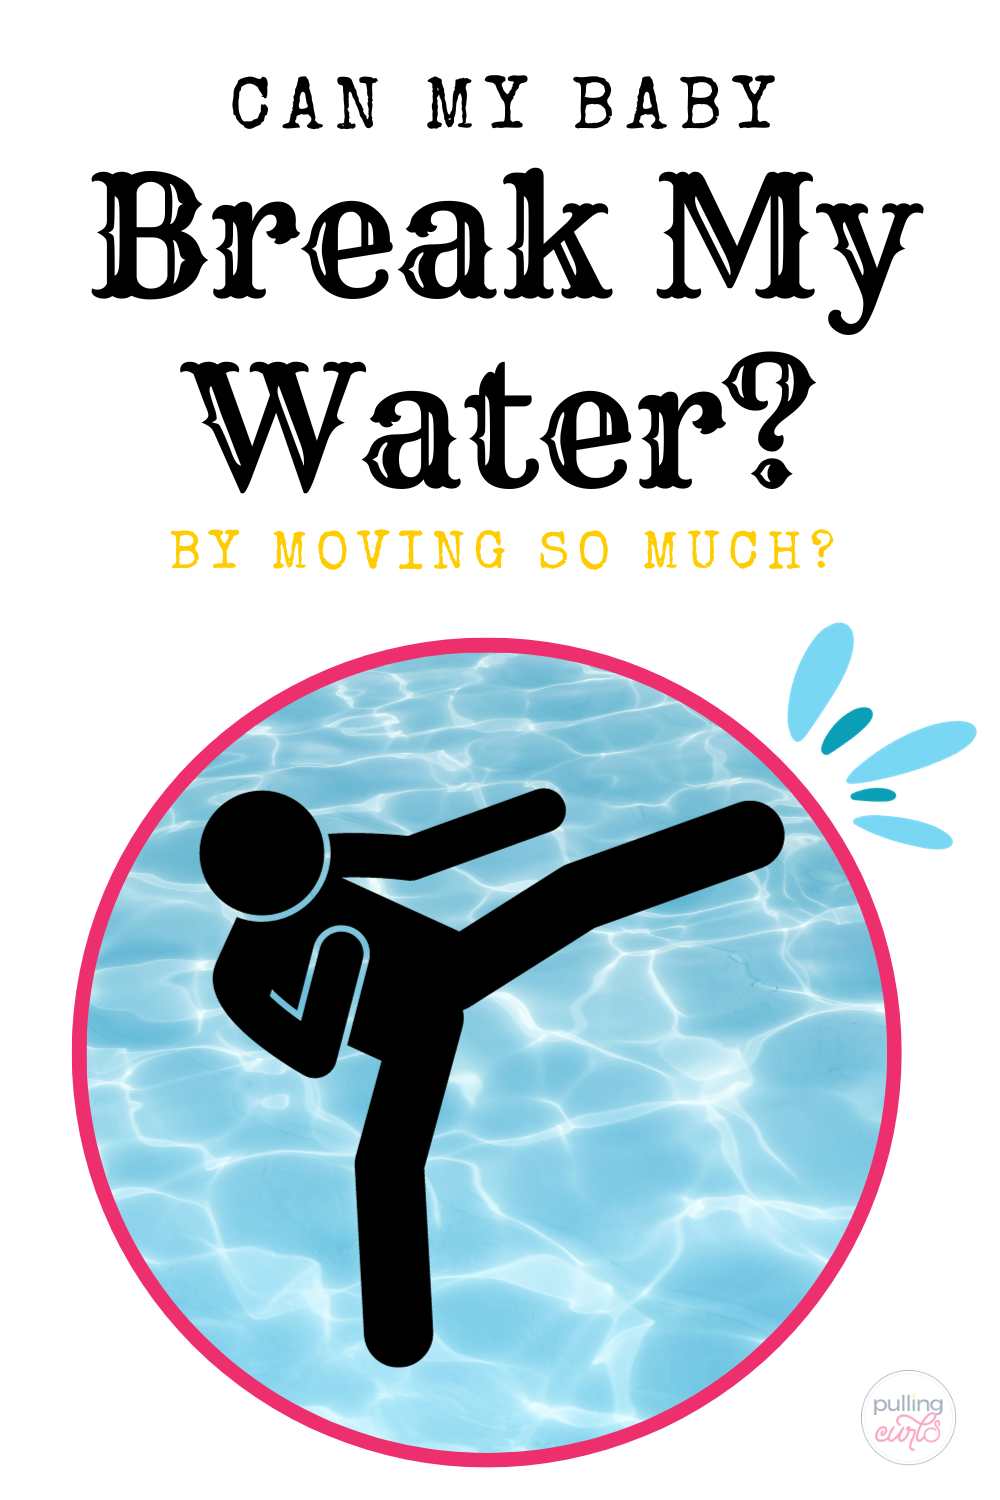 Feeling those tiny 👶 kicks? Worried you might spring a leak 🌊 any minute? You're not alone, mama! Welcome to the trimester where every flutter makes you think 💭 "Is this it? Is my water about to break💧?" Relax, we're in this together! 😊💕 via @pullingcurls